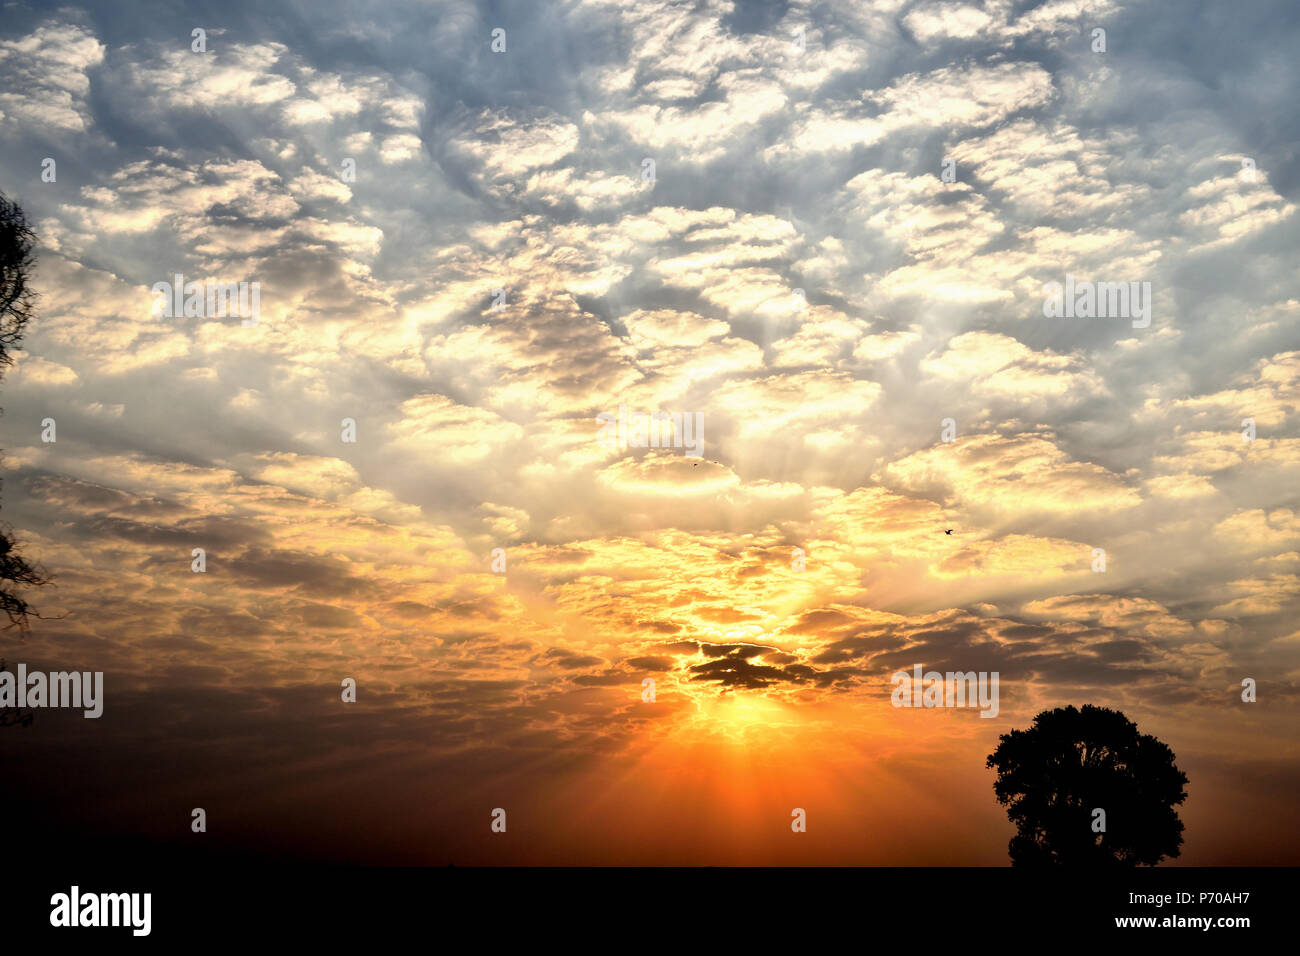 Dispersion of light wavelengths during sunset in cloudy sky Stock Photo